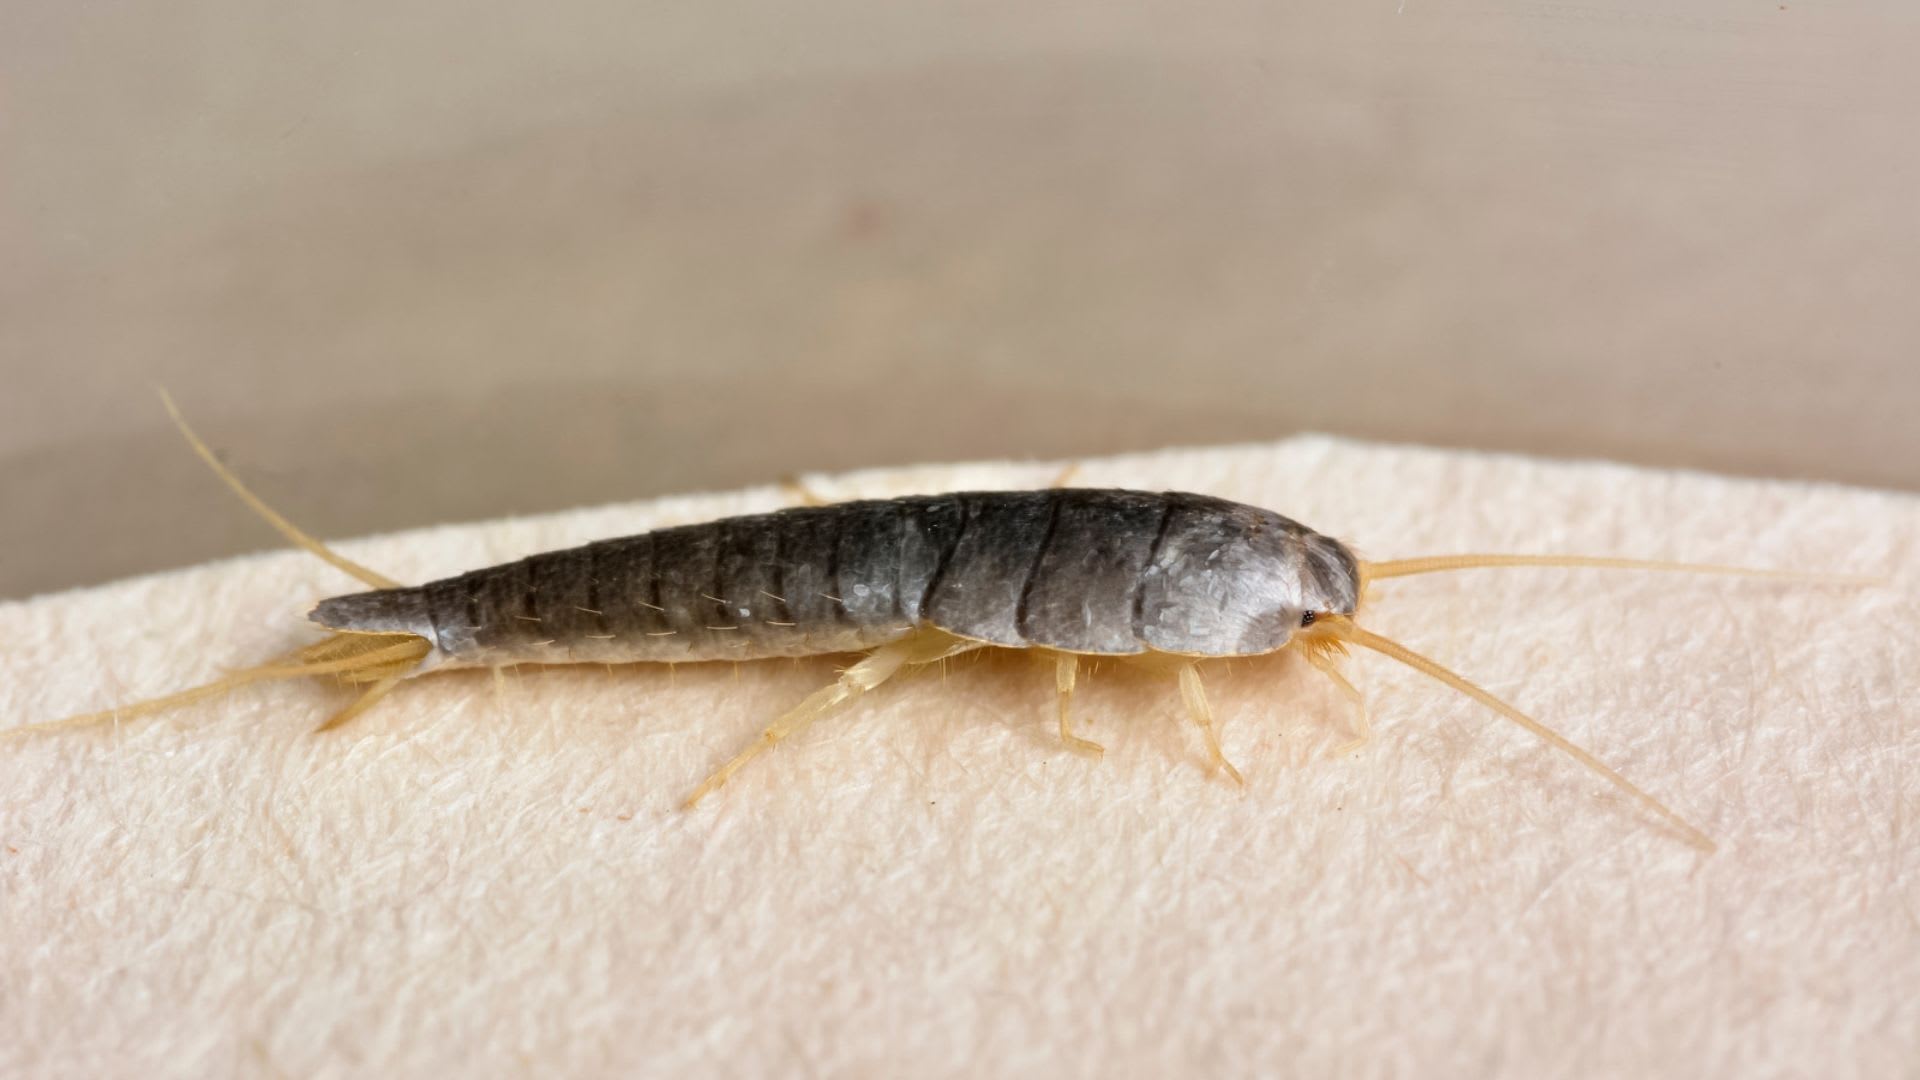 These pests can eat through clothing and even pages of your favorite books!